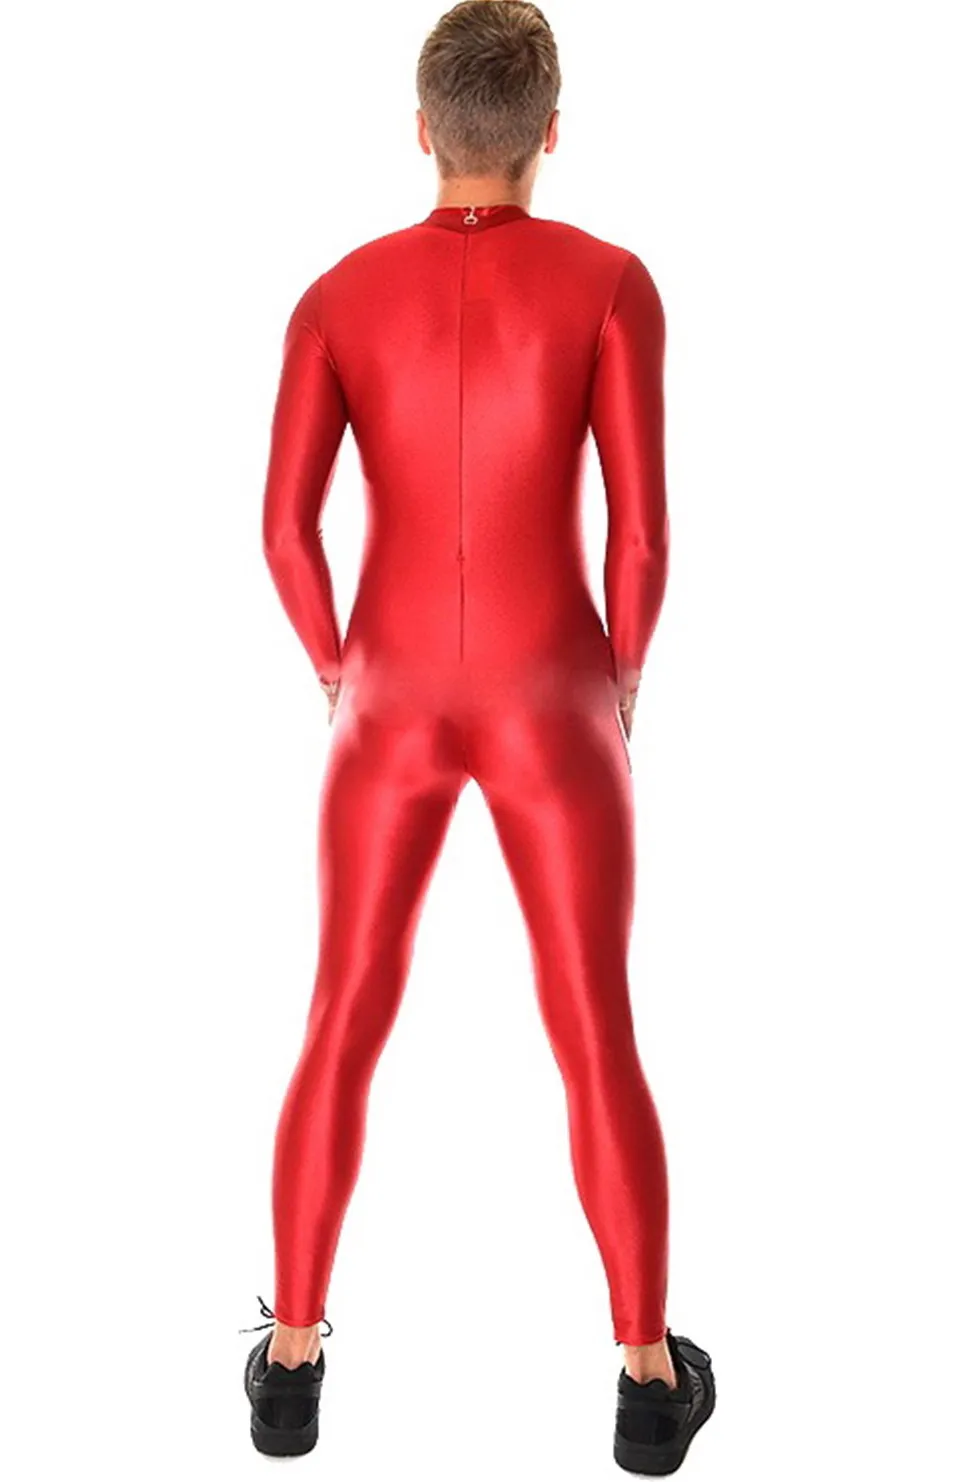 Sexy Red Lycra Spandex Shiny Spandex Catsuit For Unisex Yoga